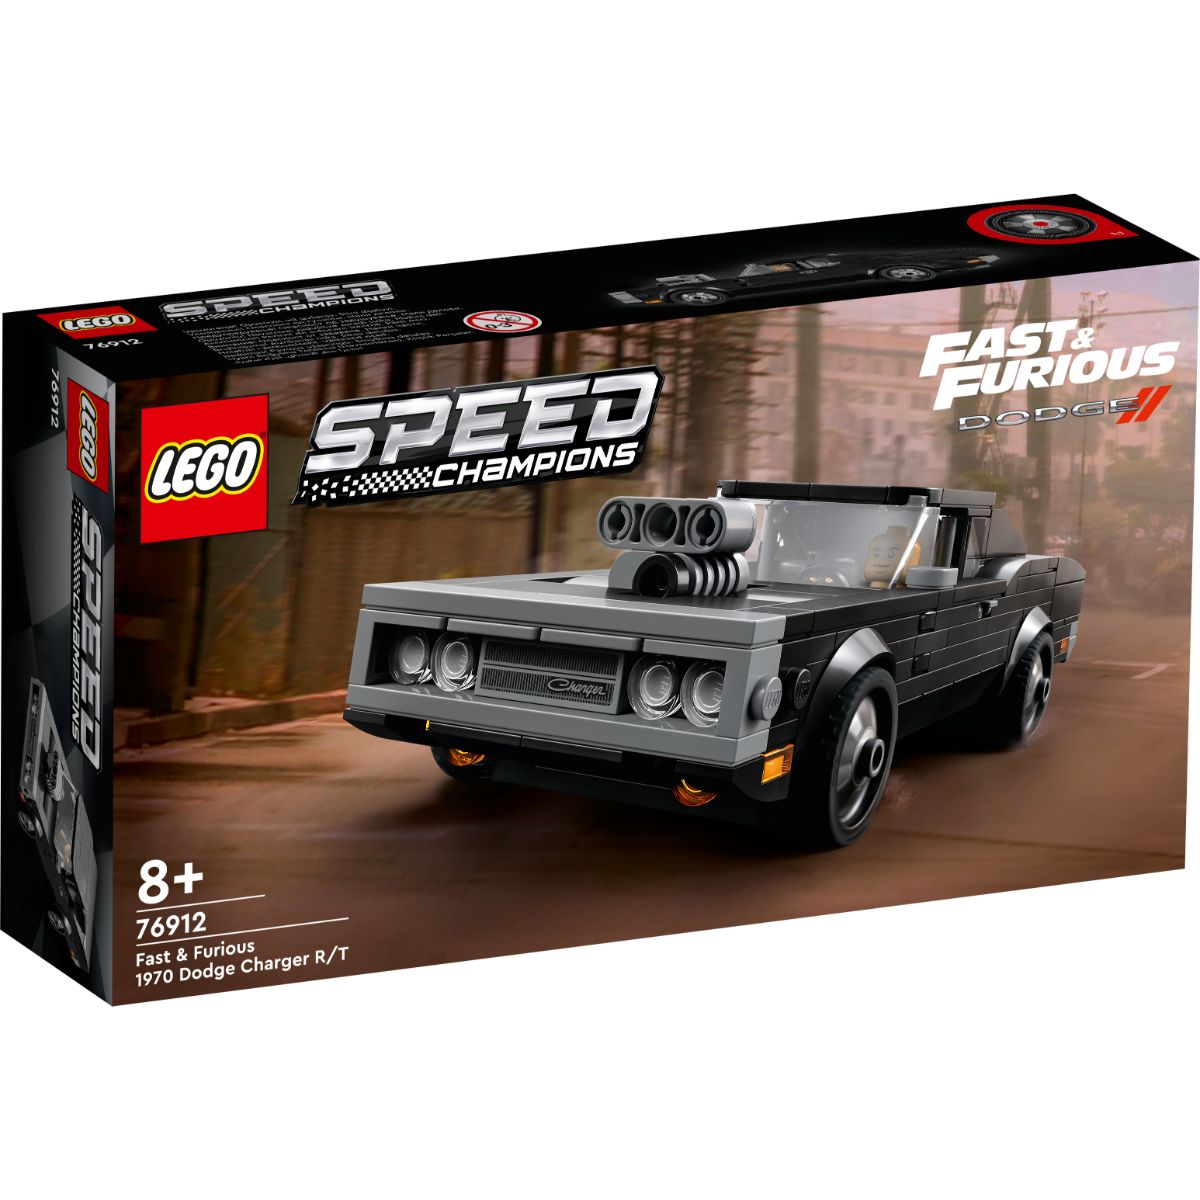 LEGO® Speed Champions – Dodge Charger RT 1970 Furios si Iute (76912) (76912)